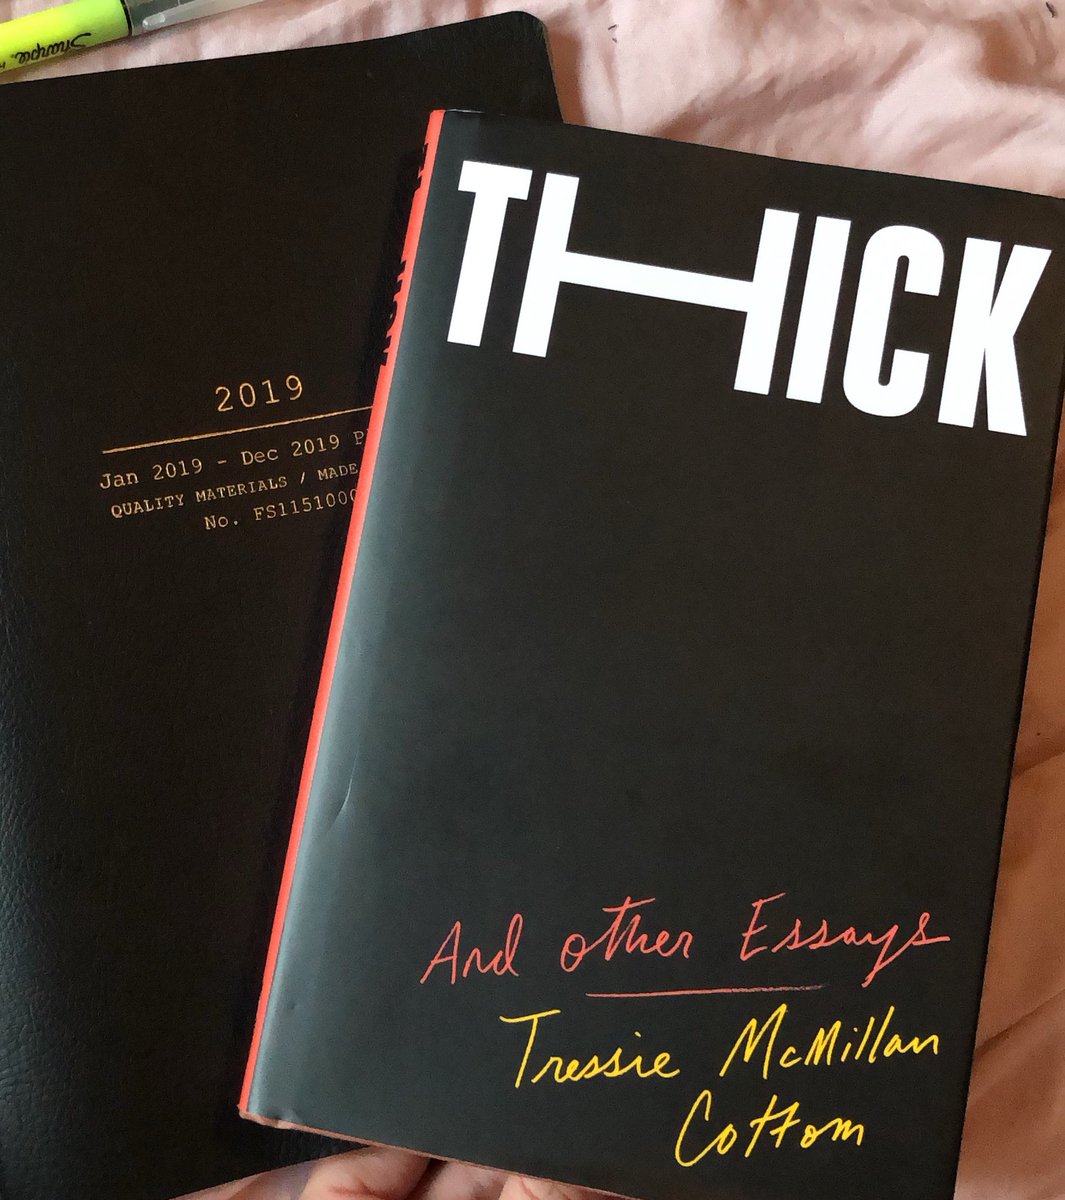 2.  Thick: And Other Essays - Tressie McMillan Cottom